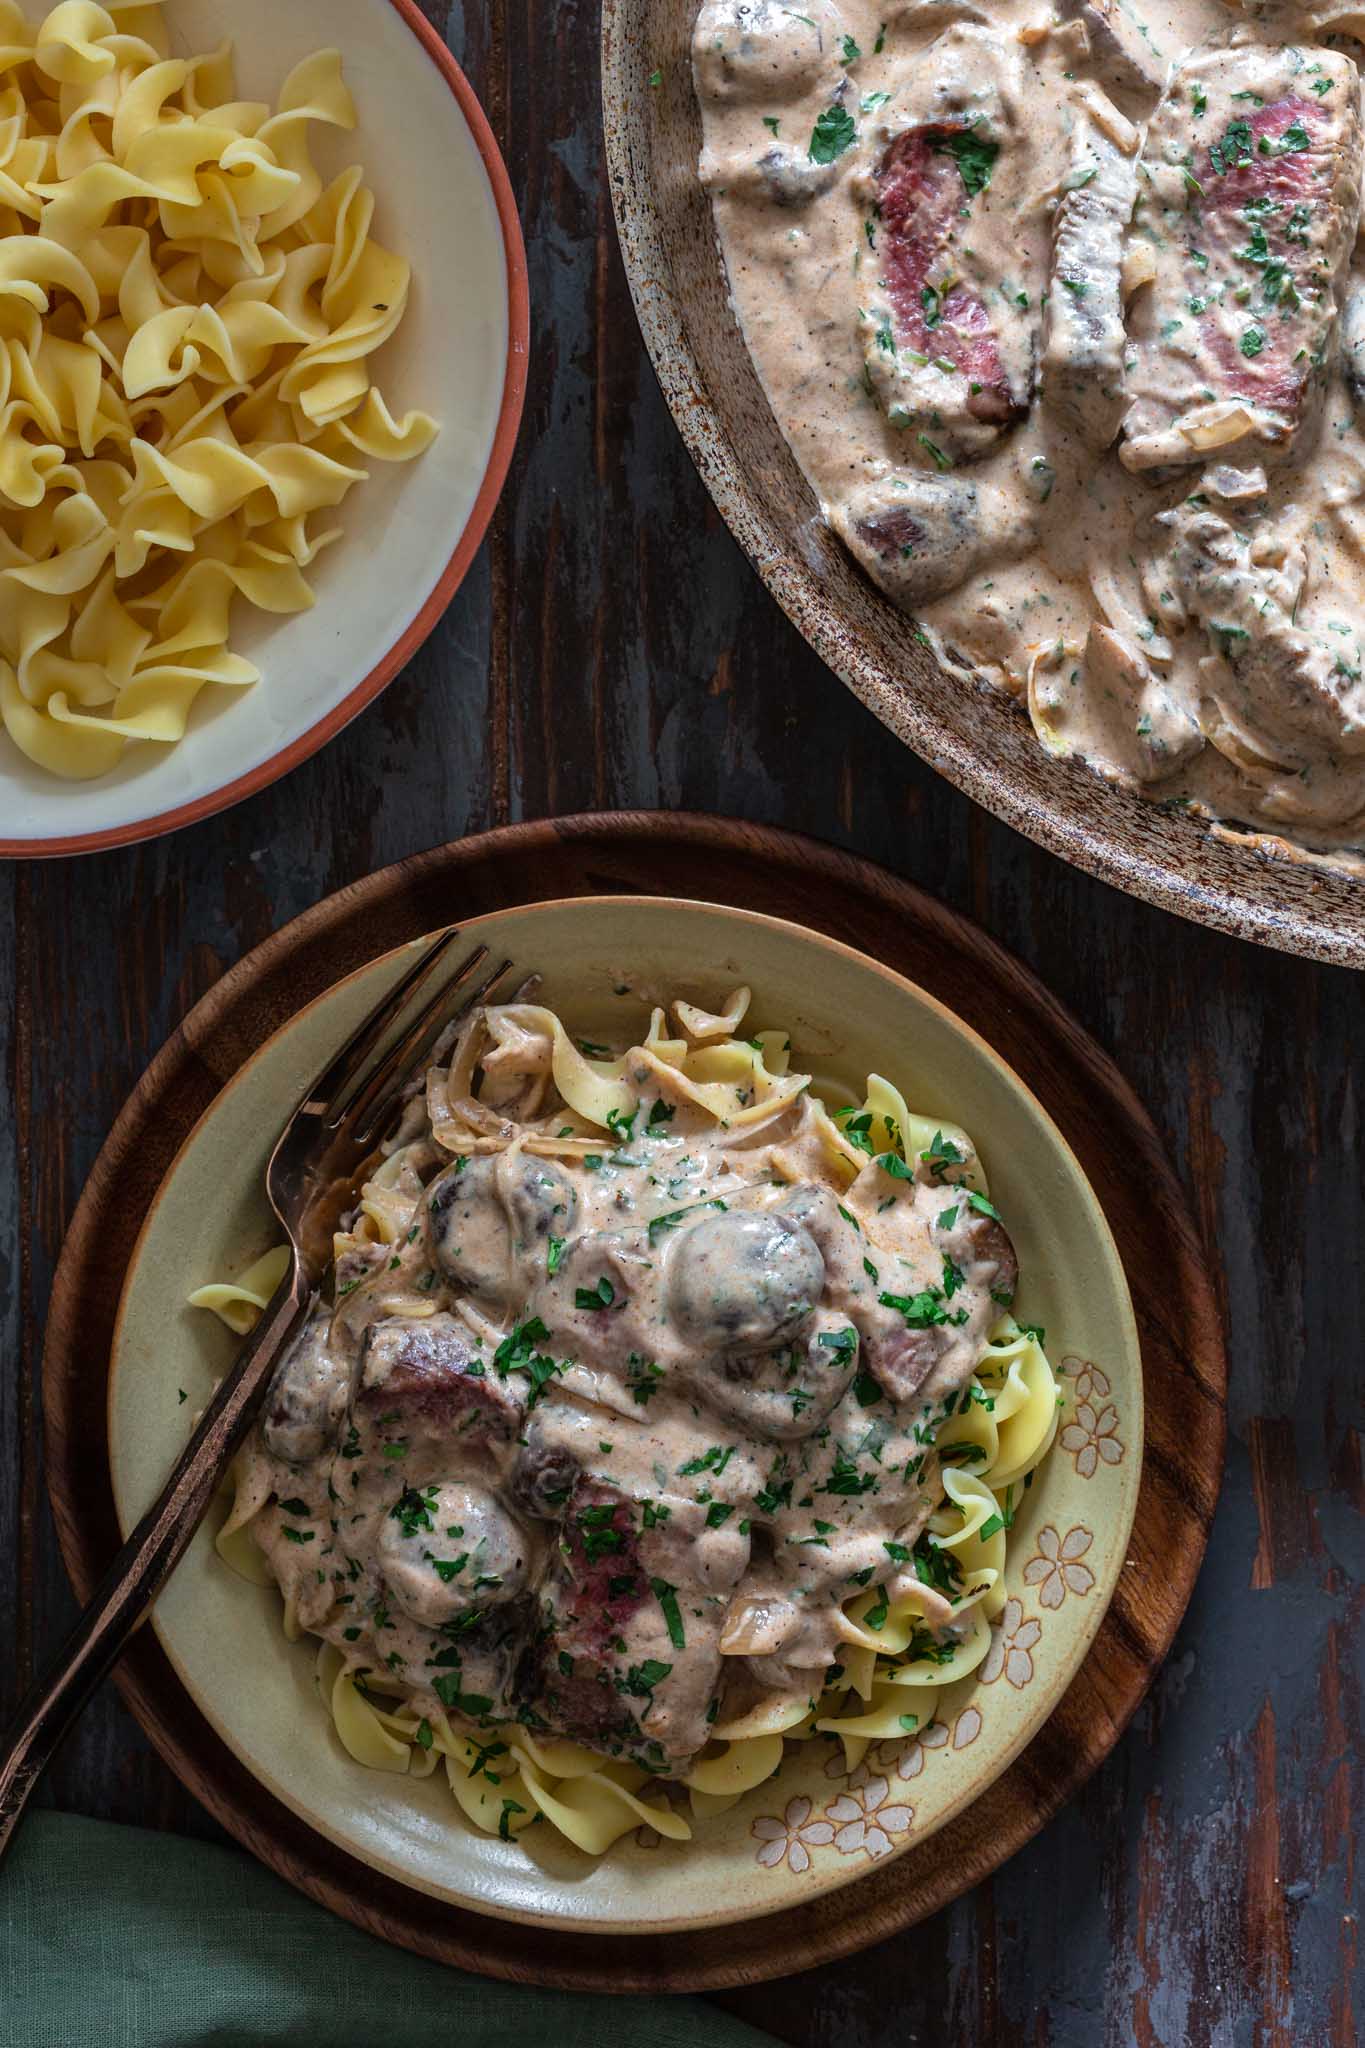 Beef stroganoff and egg noodles.